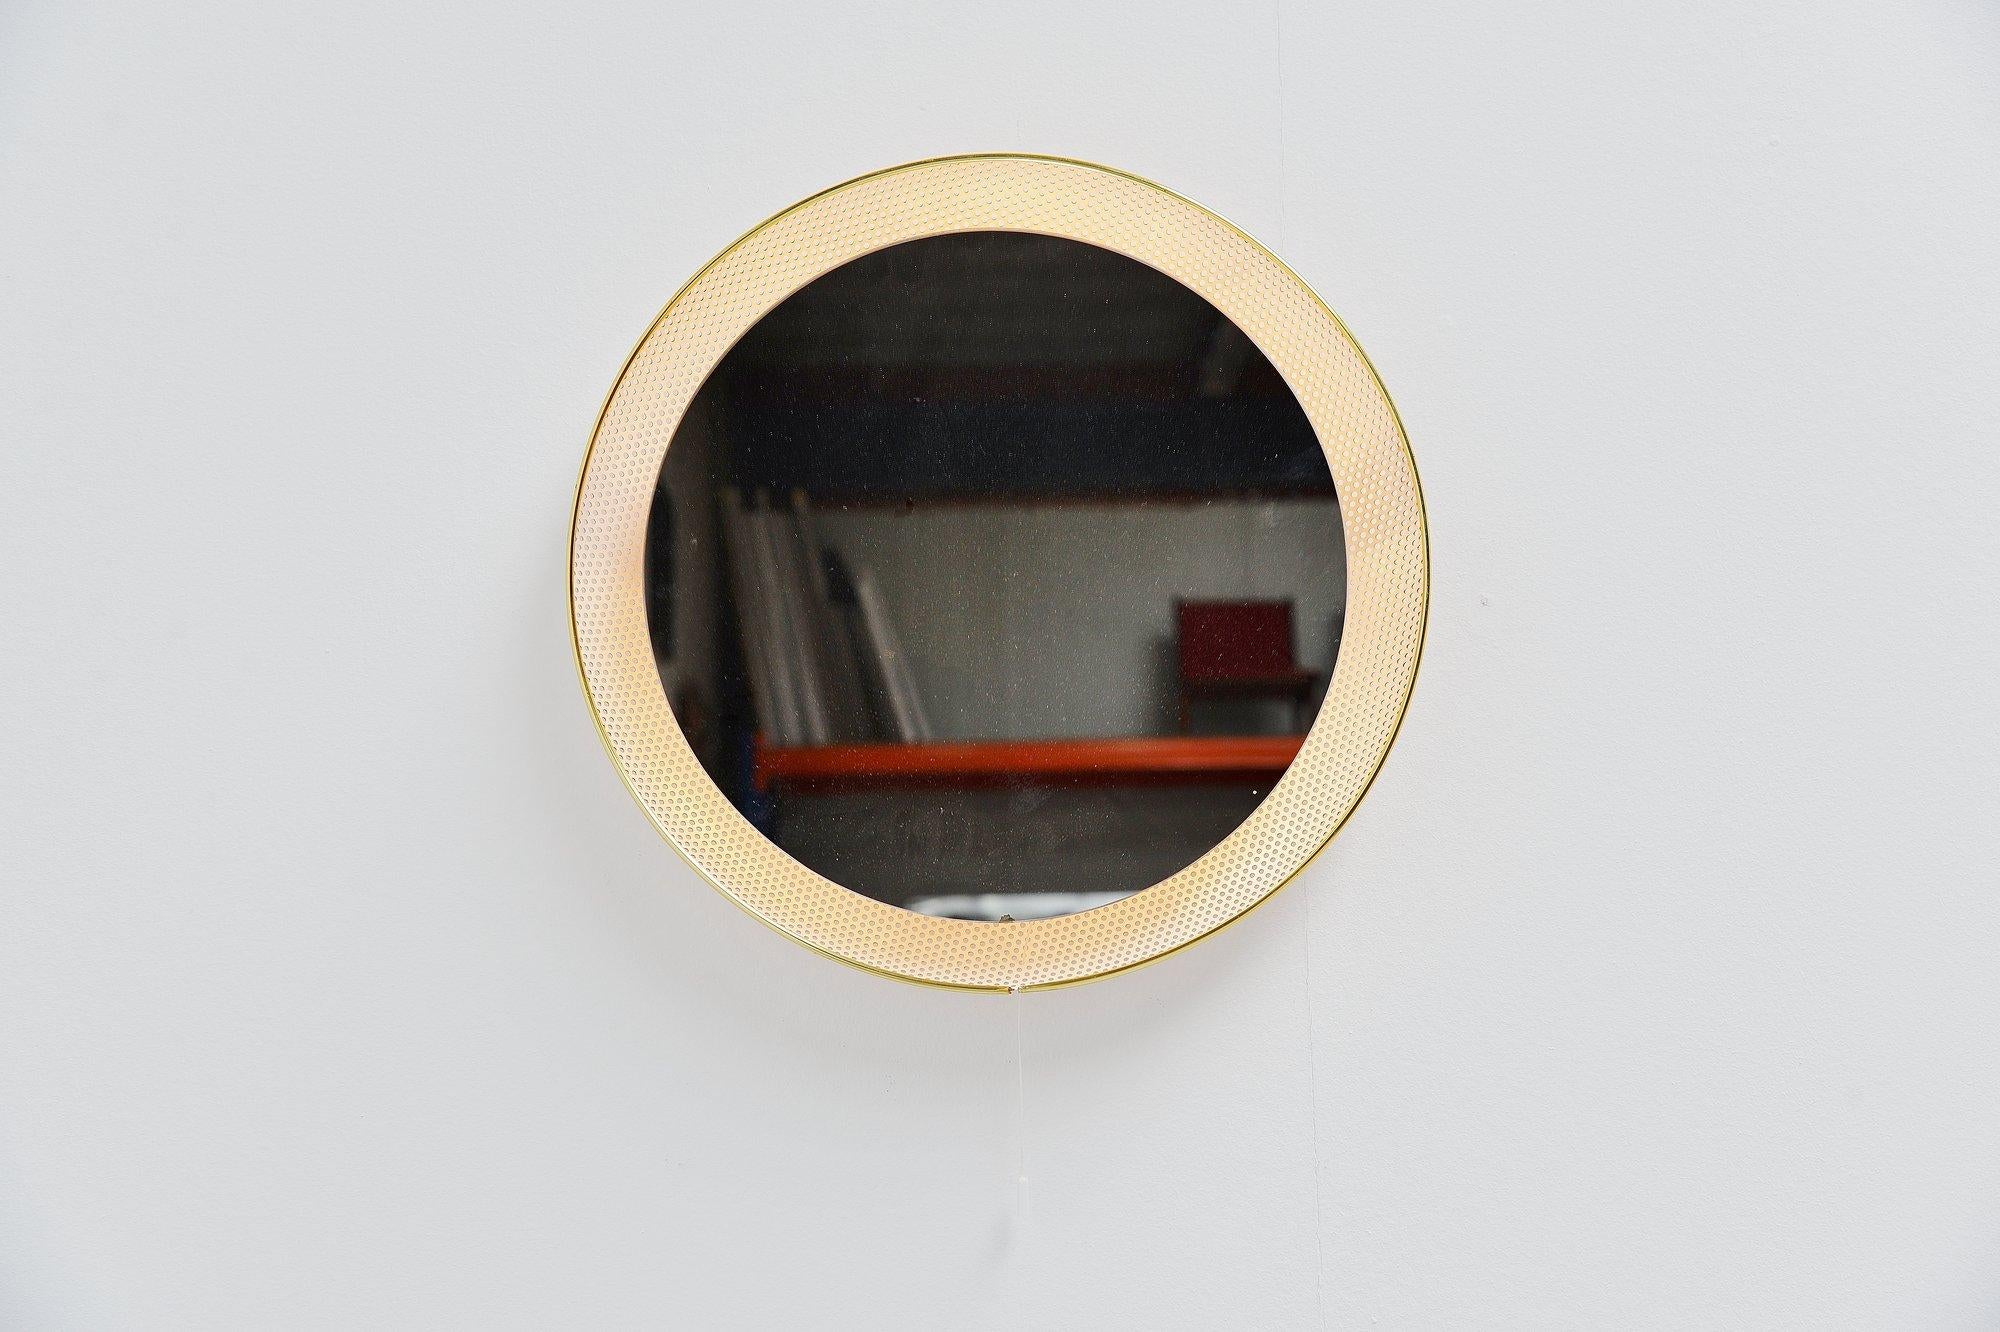 Very nice and decorative round illuminated wall mirror designed by Floris Fiedeldij made by Artimeta Soest, Holland, 1960. These mirrors are often sold or attributed as Mathieu Matégot mirrors. This is a white painted mirror, fully die cut back.